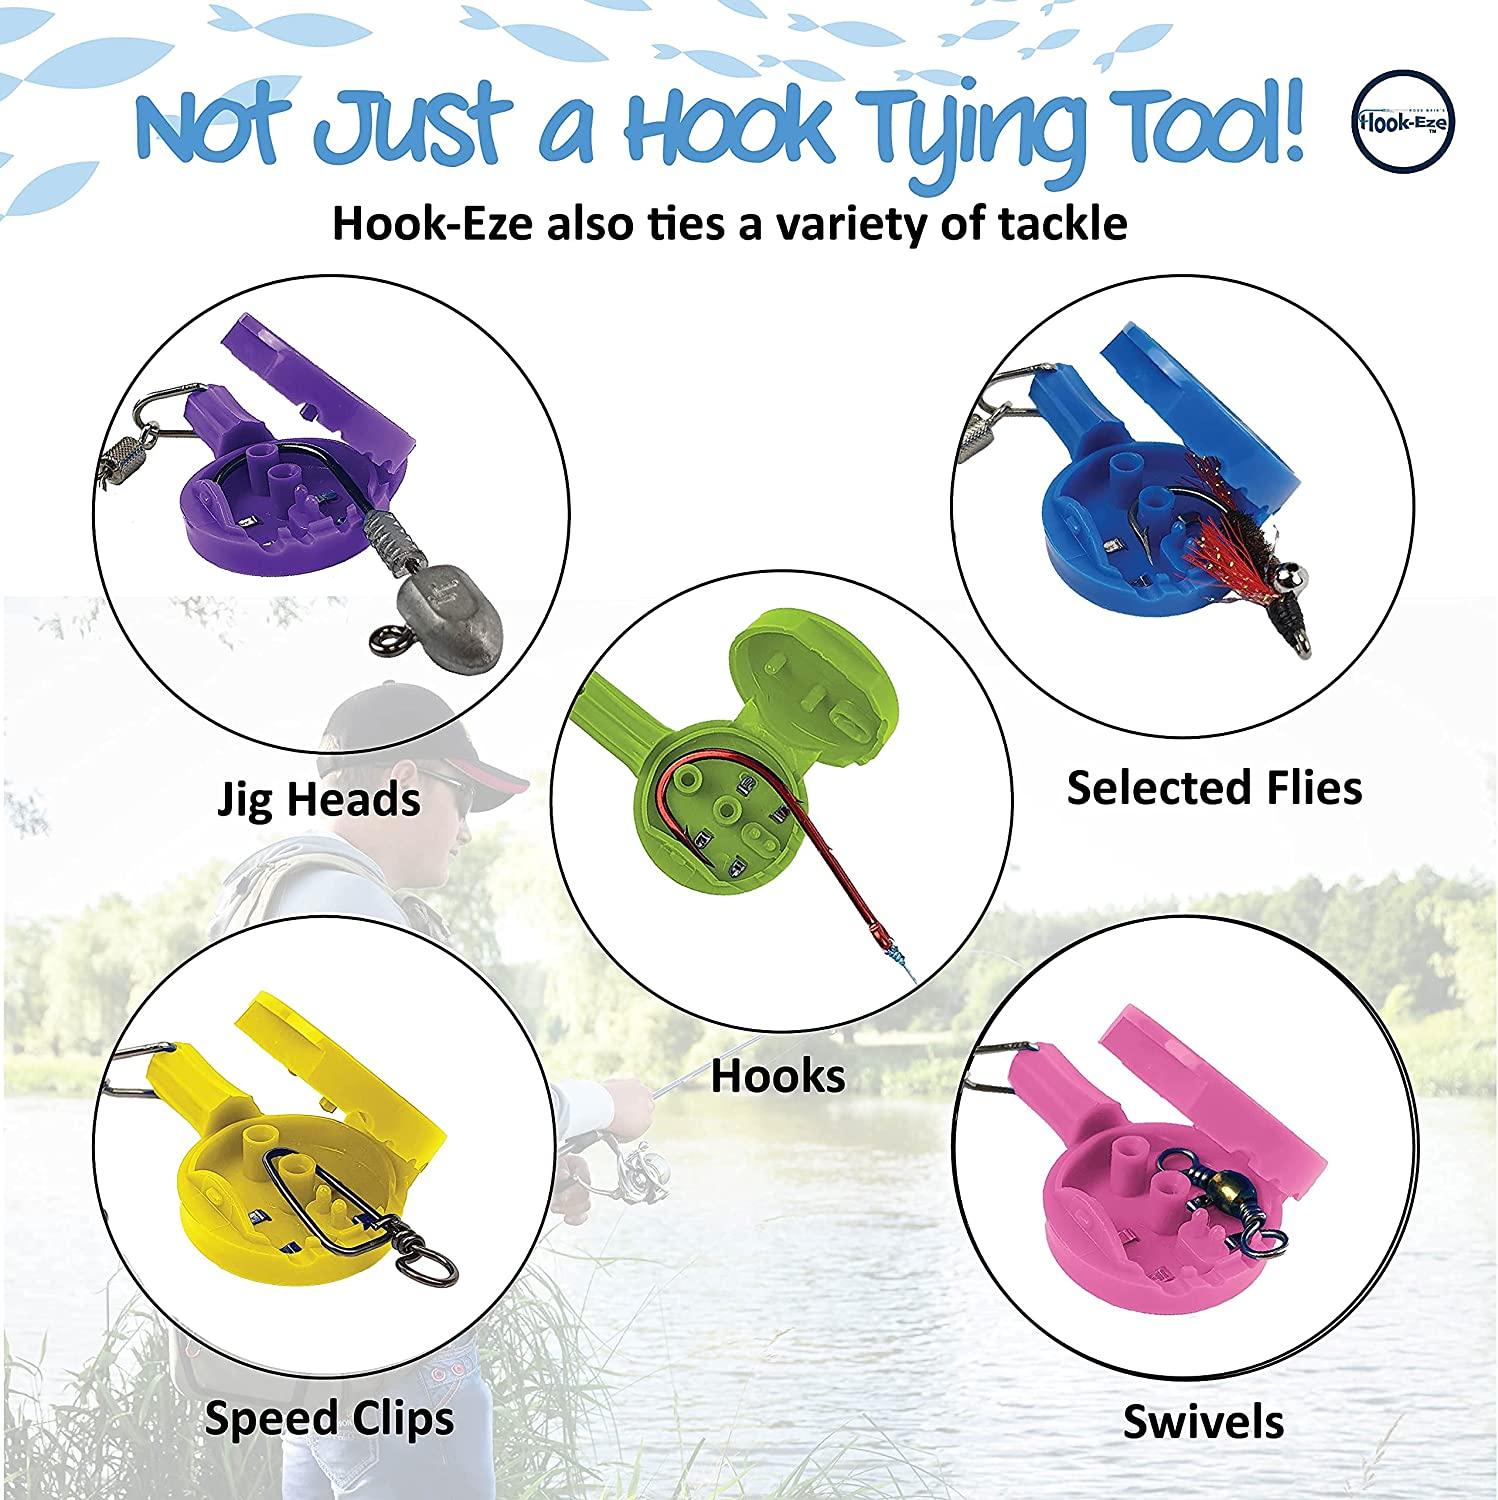 HOOK-EZE Knot Tying Tool Cover Hooks on 4 Fishing Poles - Line